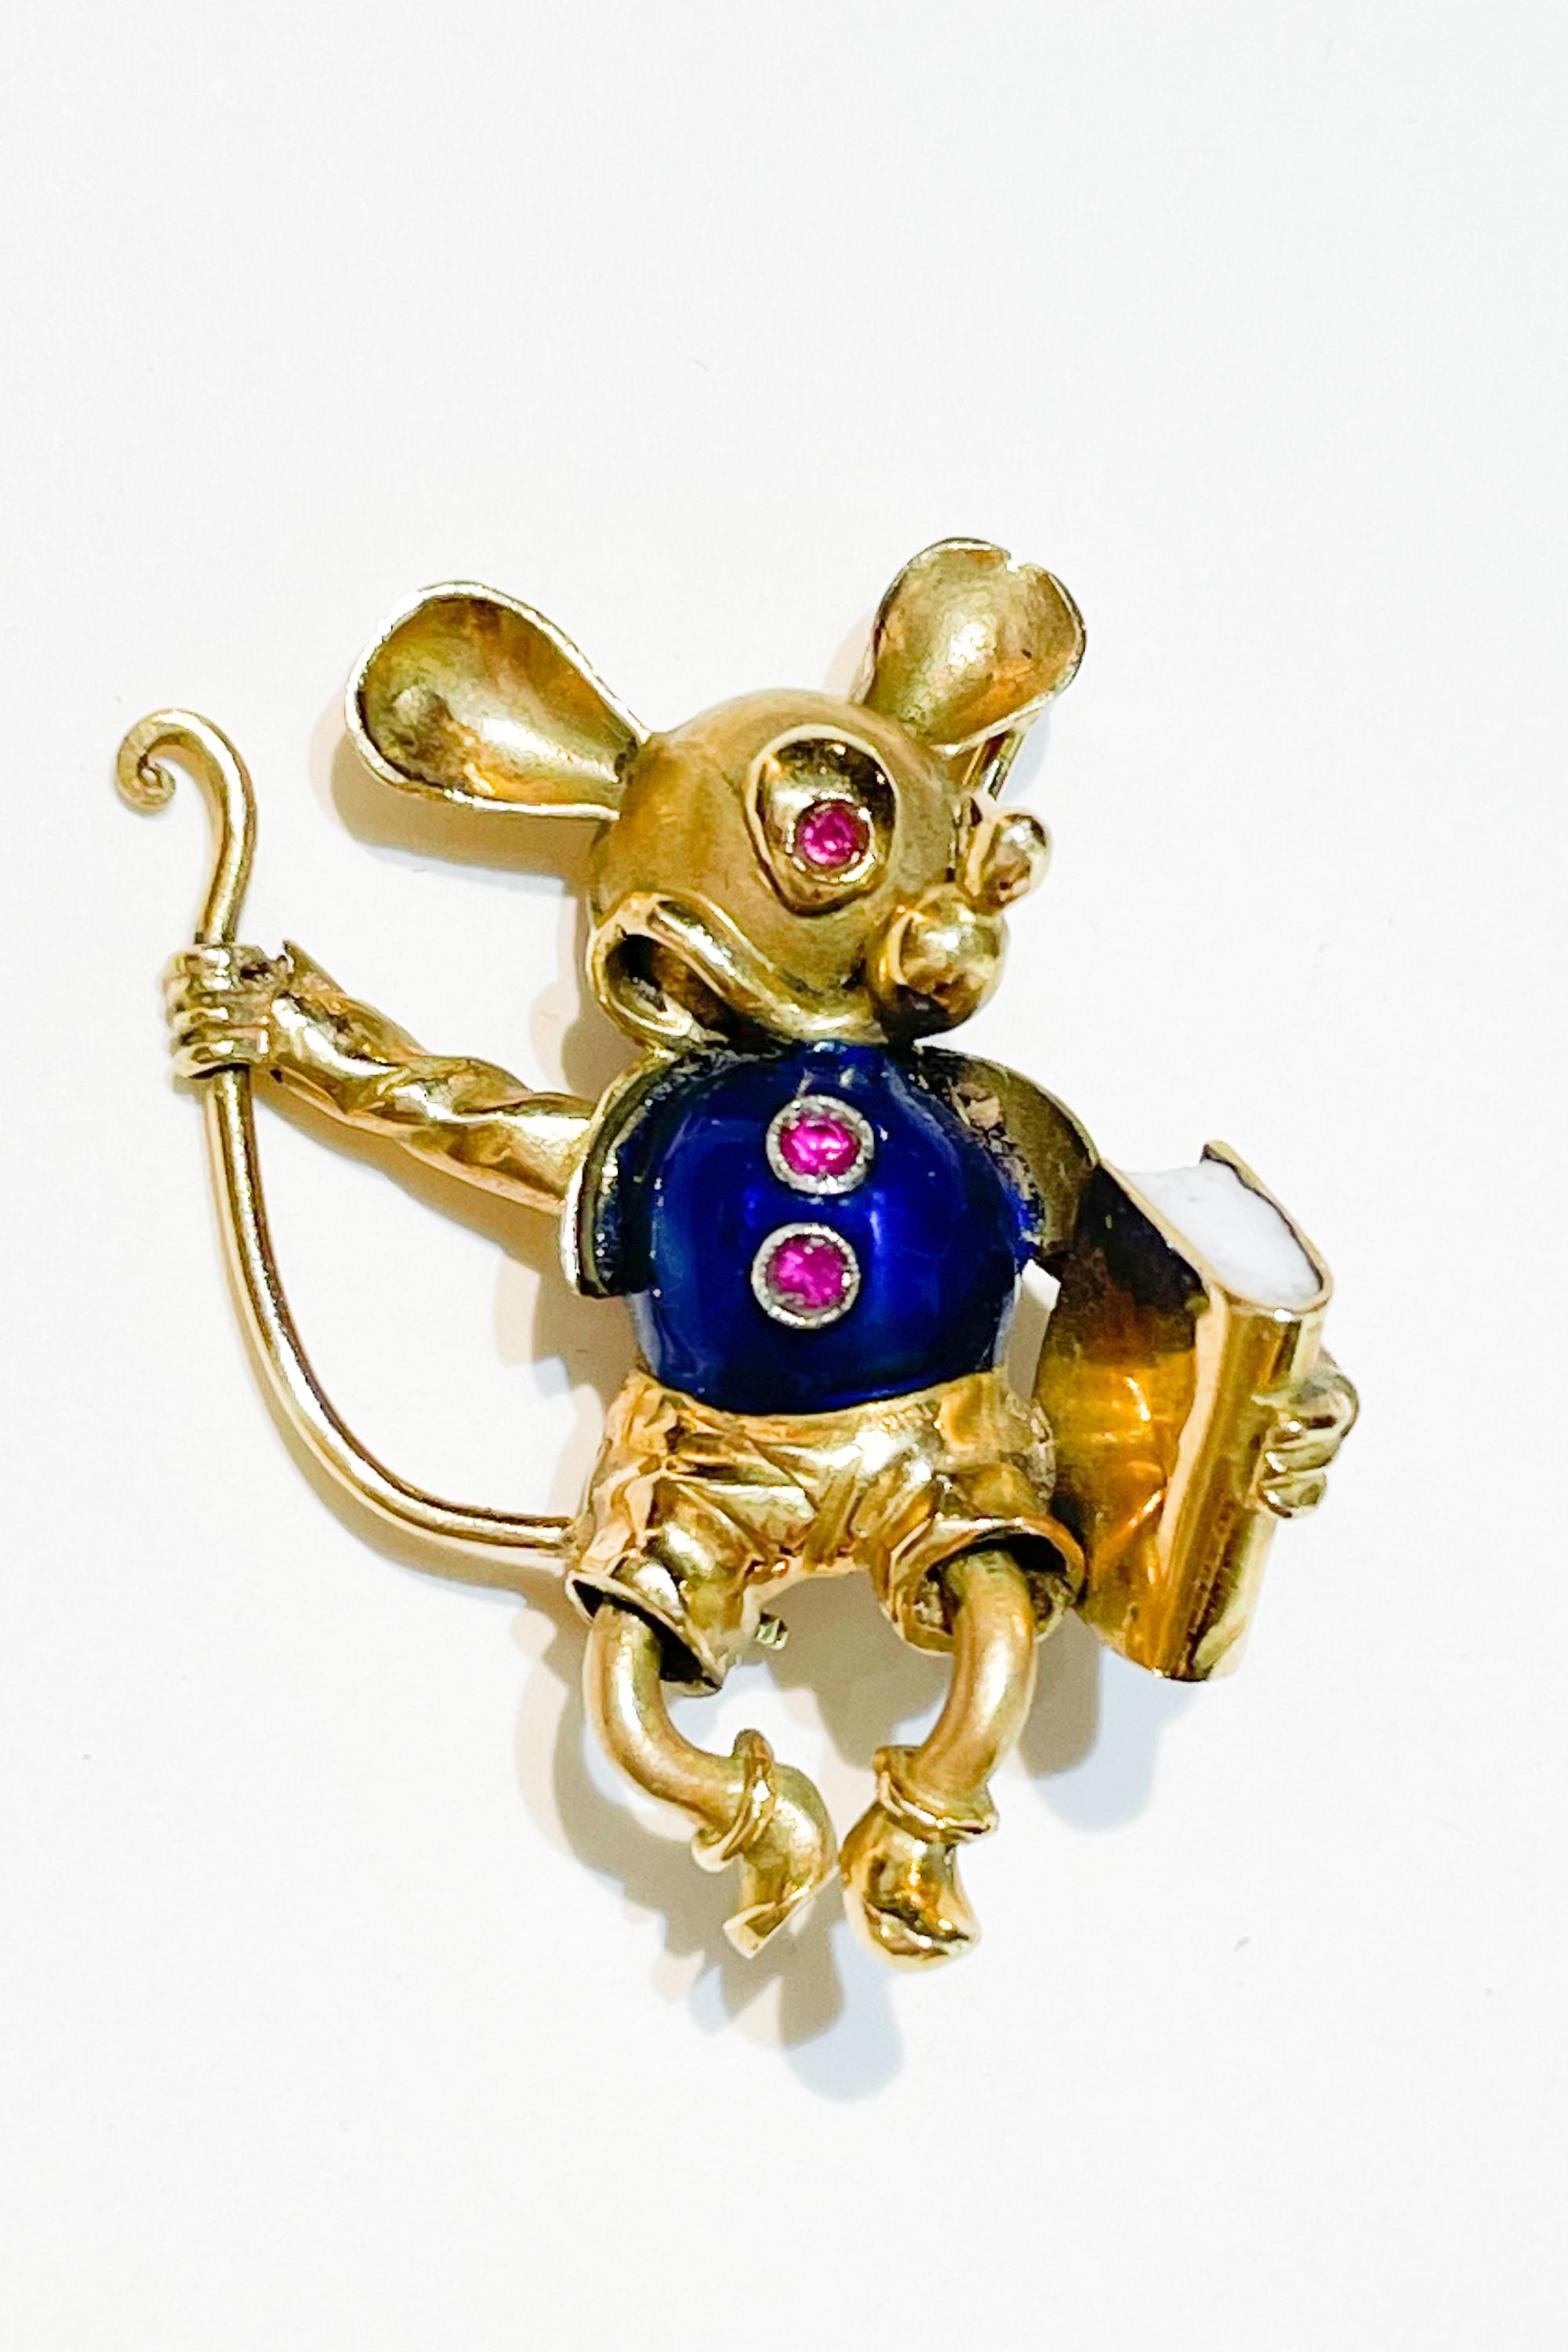 Mickey or Micky Mouse Brooch in 18 carat Yellow Gold and Enamels. - Art by Unknown